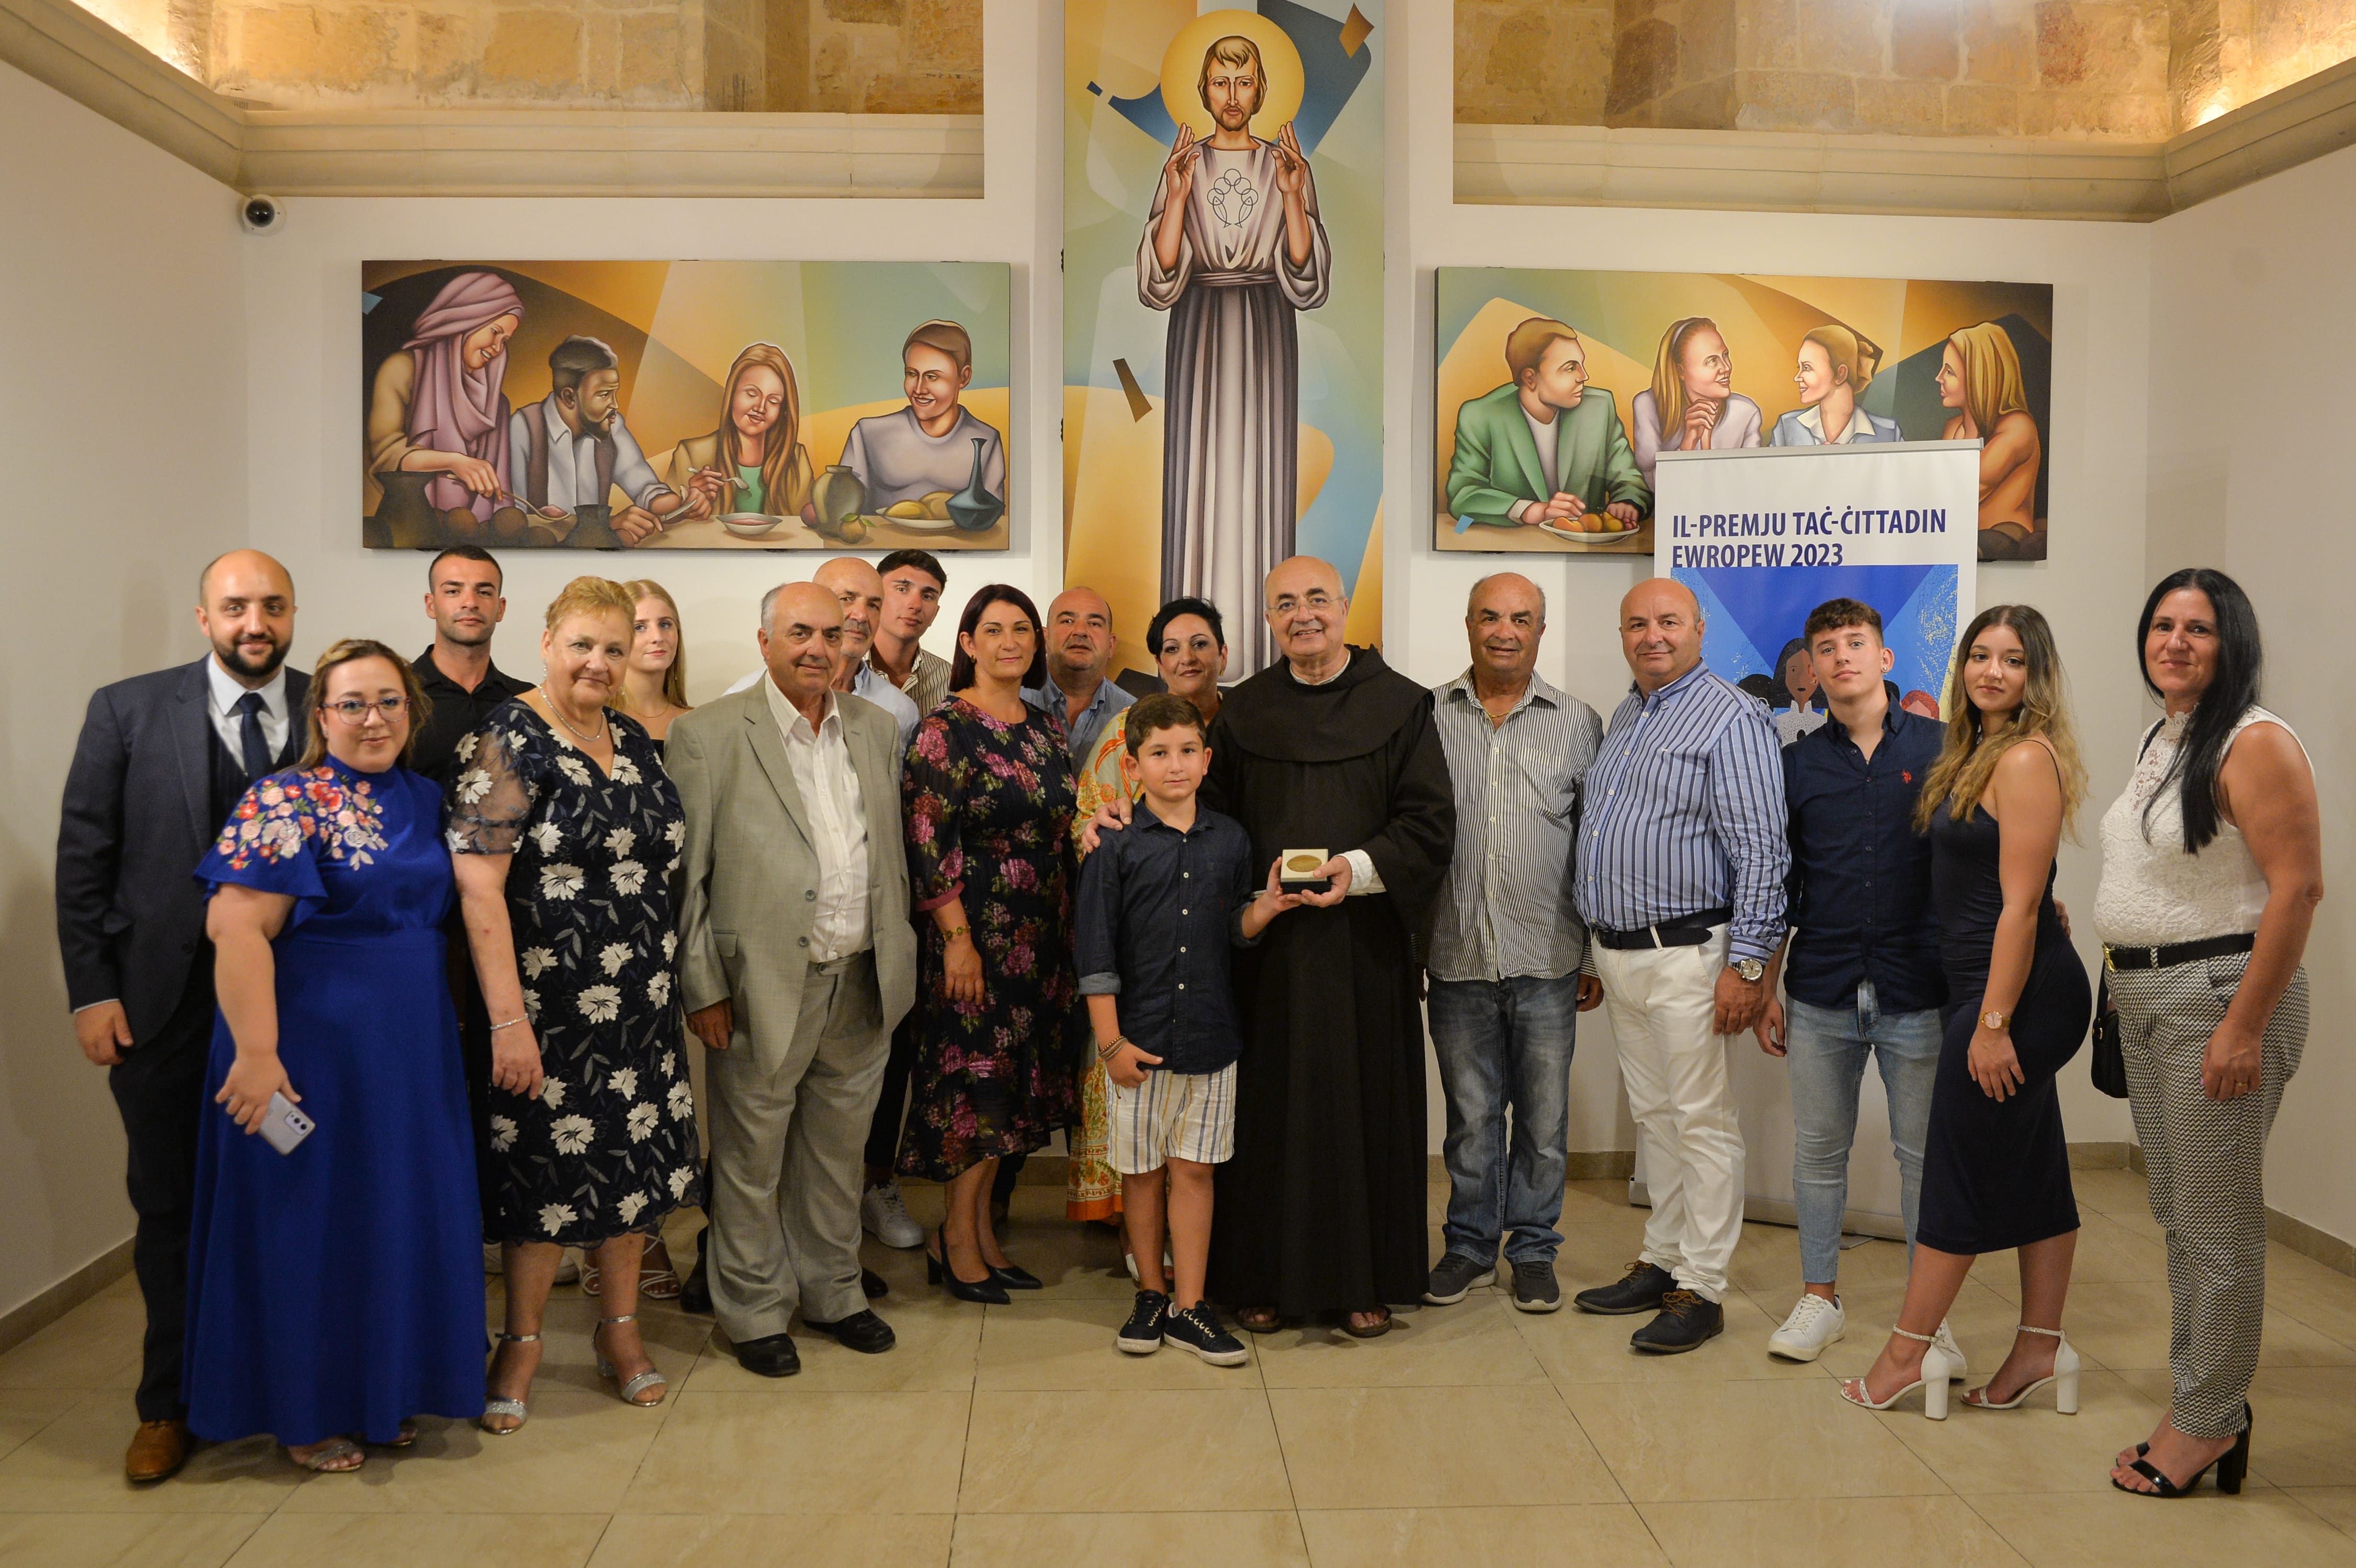 Fr Marcellino Micallef with invitees at the 2023 European Citizen's Prize award ceremony